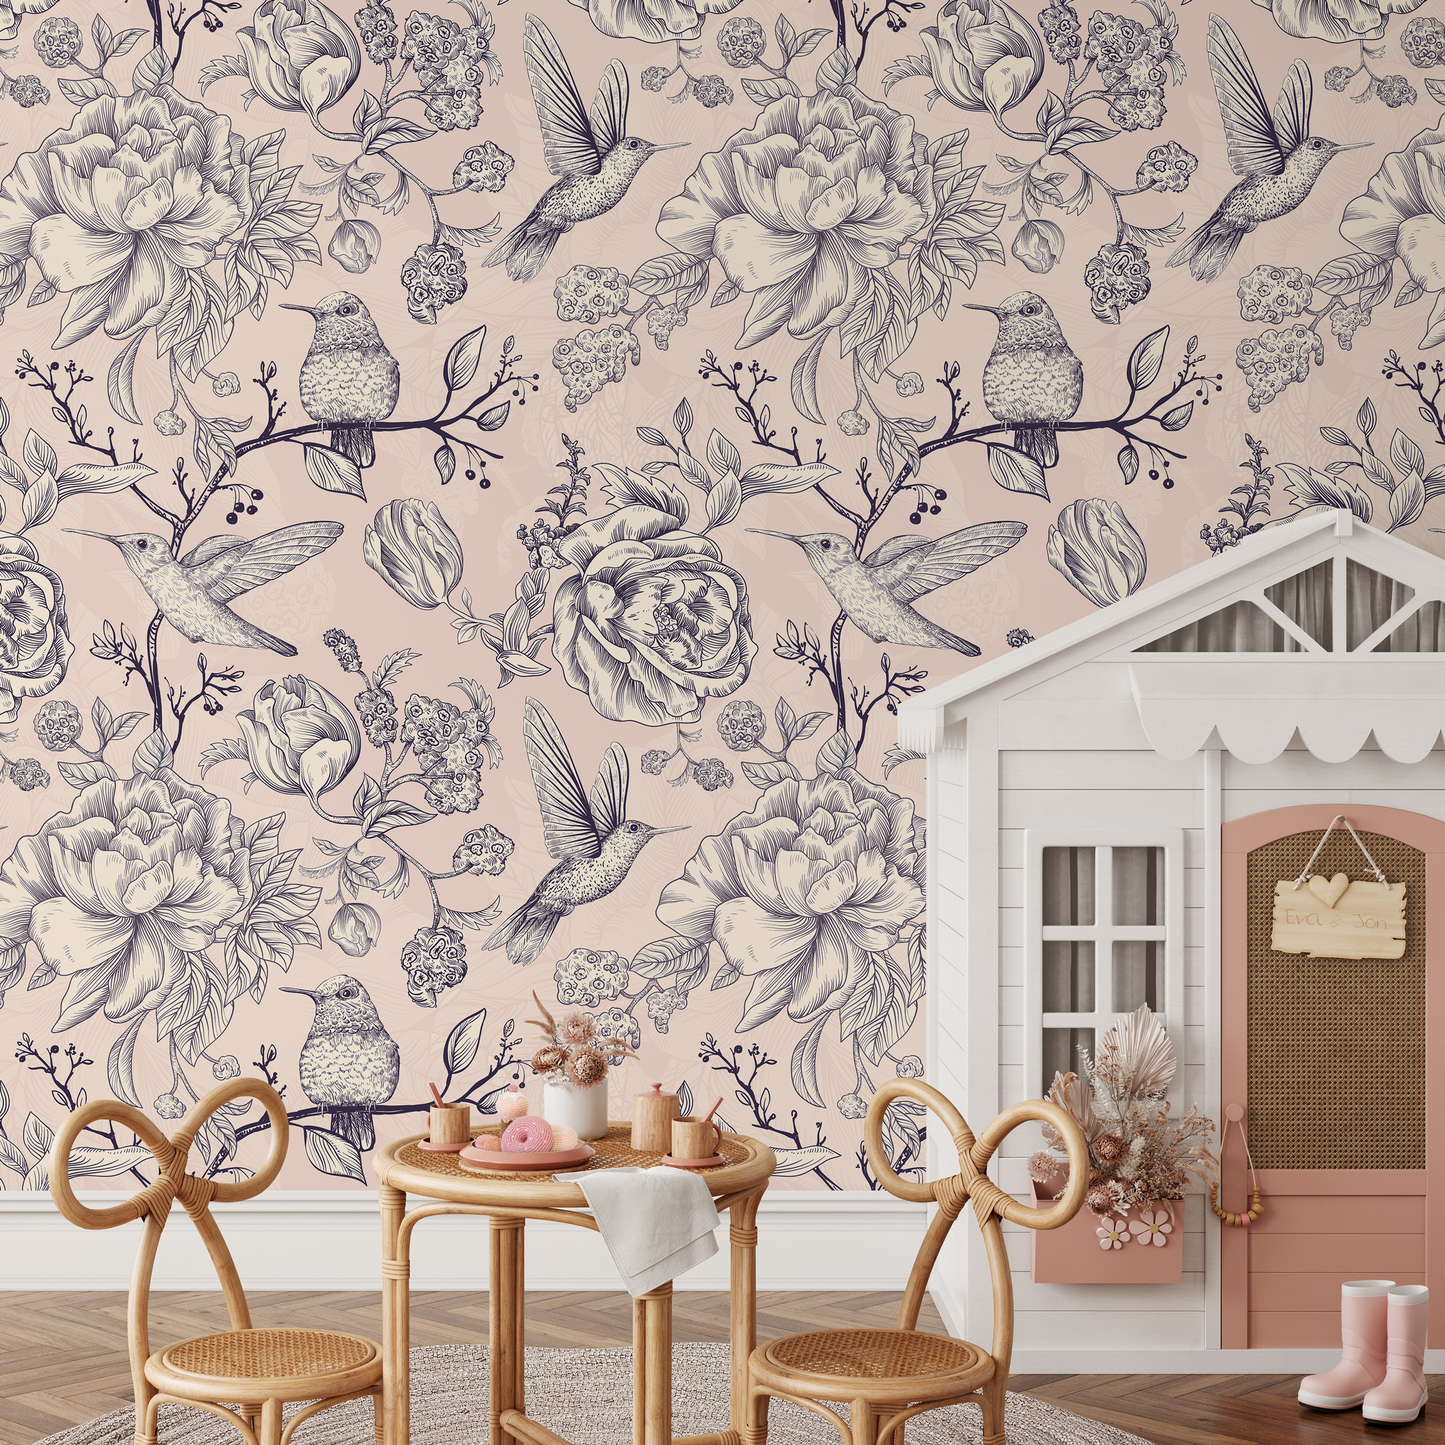 Wallpaper Peel and Stick Wallpaper Removable Wallpaper Home Decor Wall Art Wall Decor Room Decor / Vintage Floral  Bird Wallpaper - A626